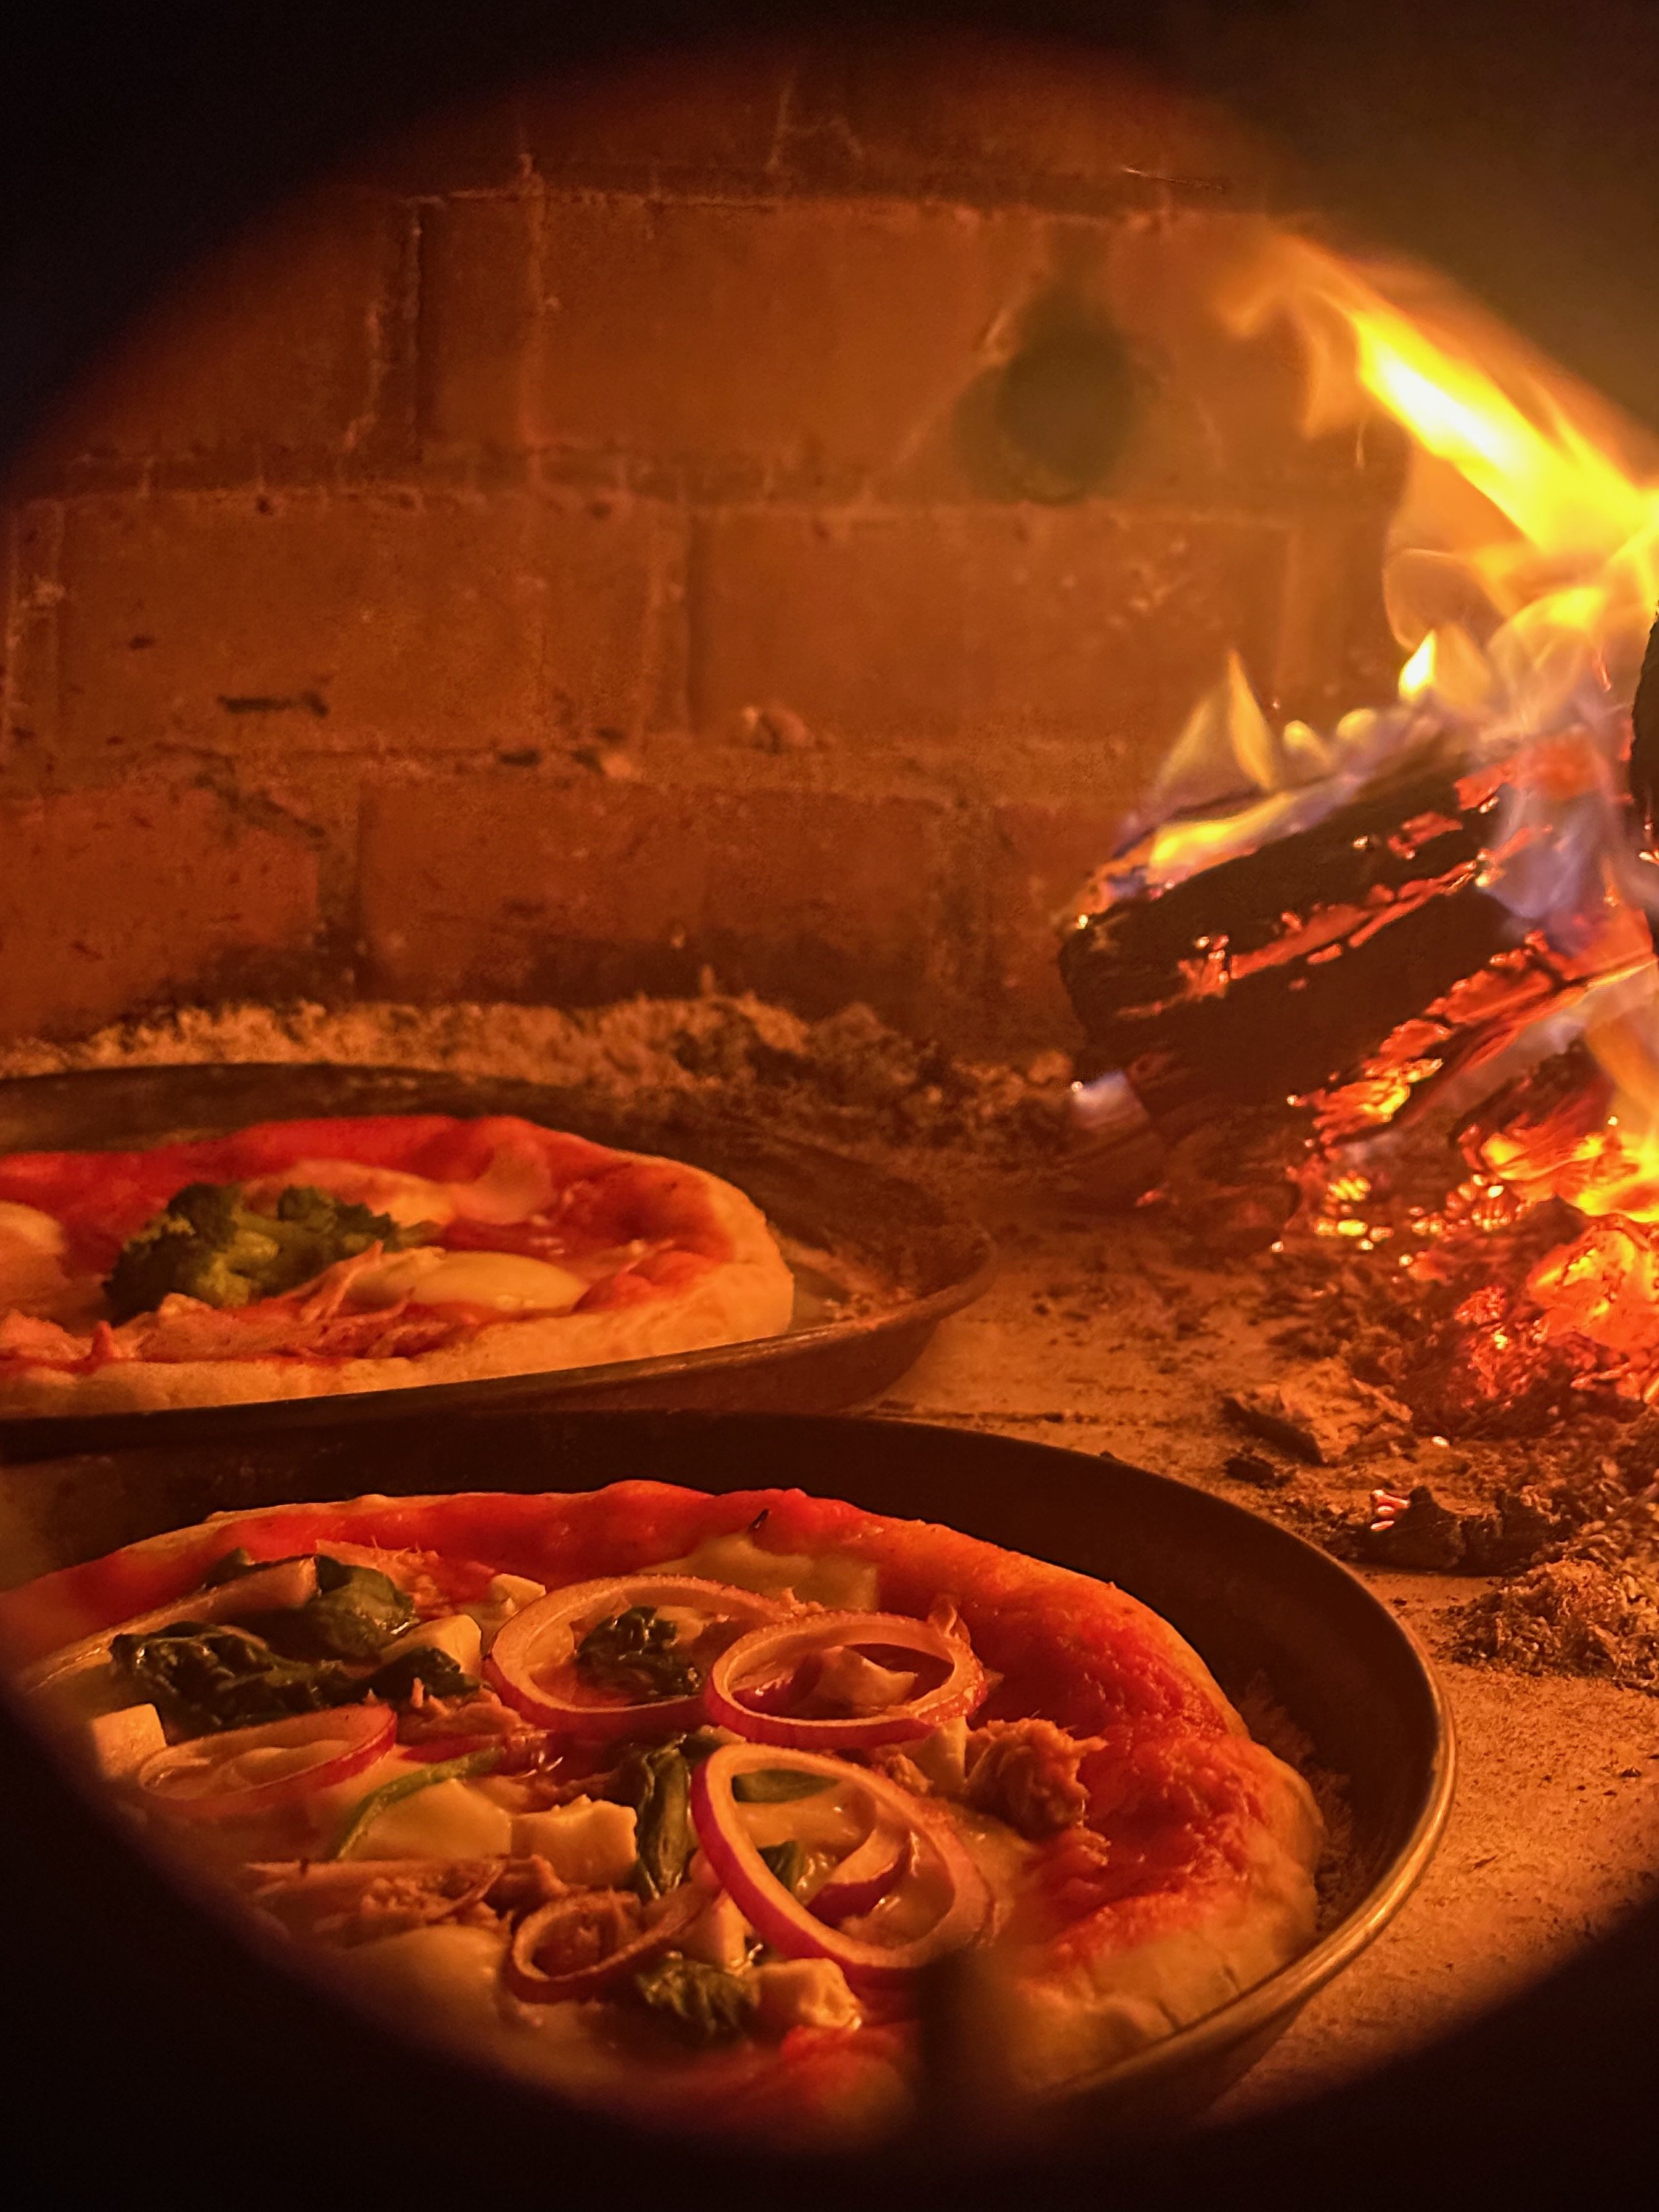 Two pizzas in a pizza oven with a wood fire burning inside.